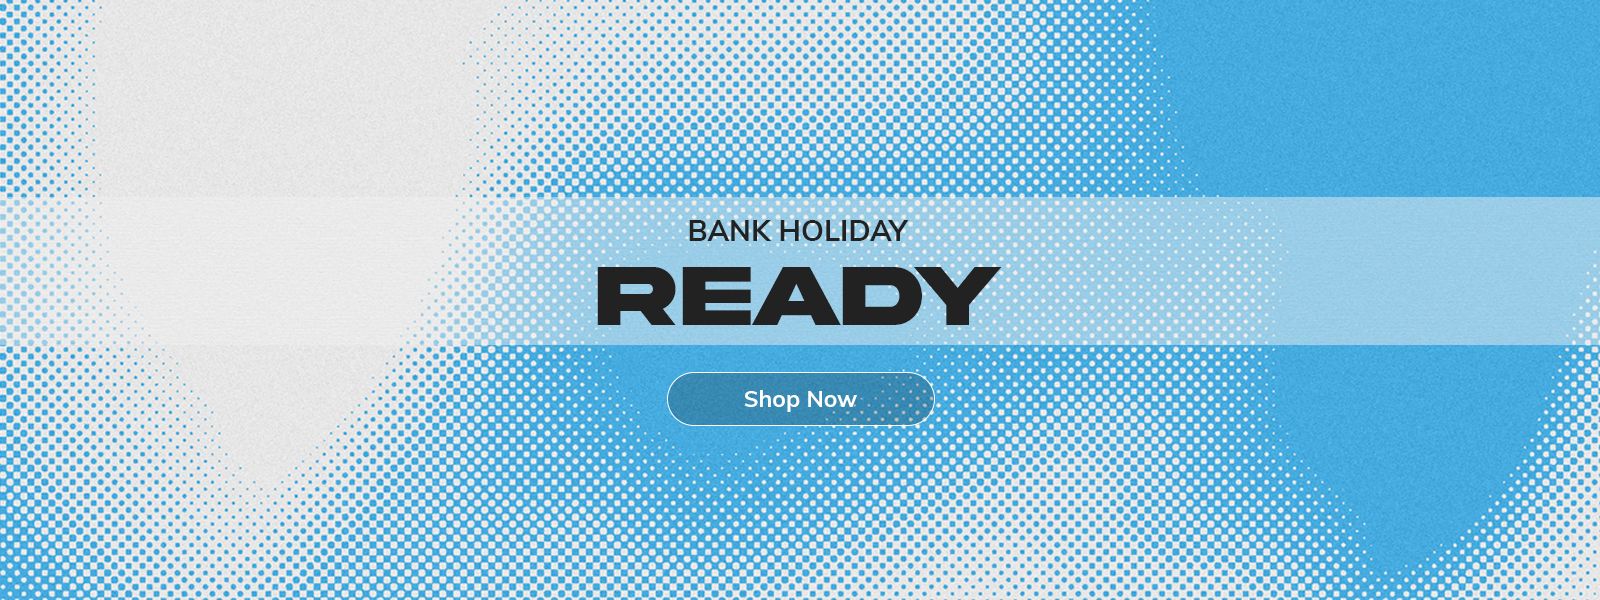 Bank Holiday Ready - Shop Now